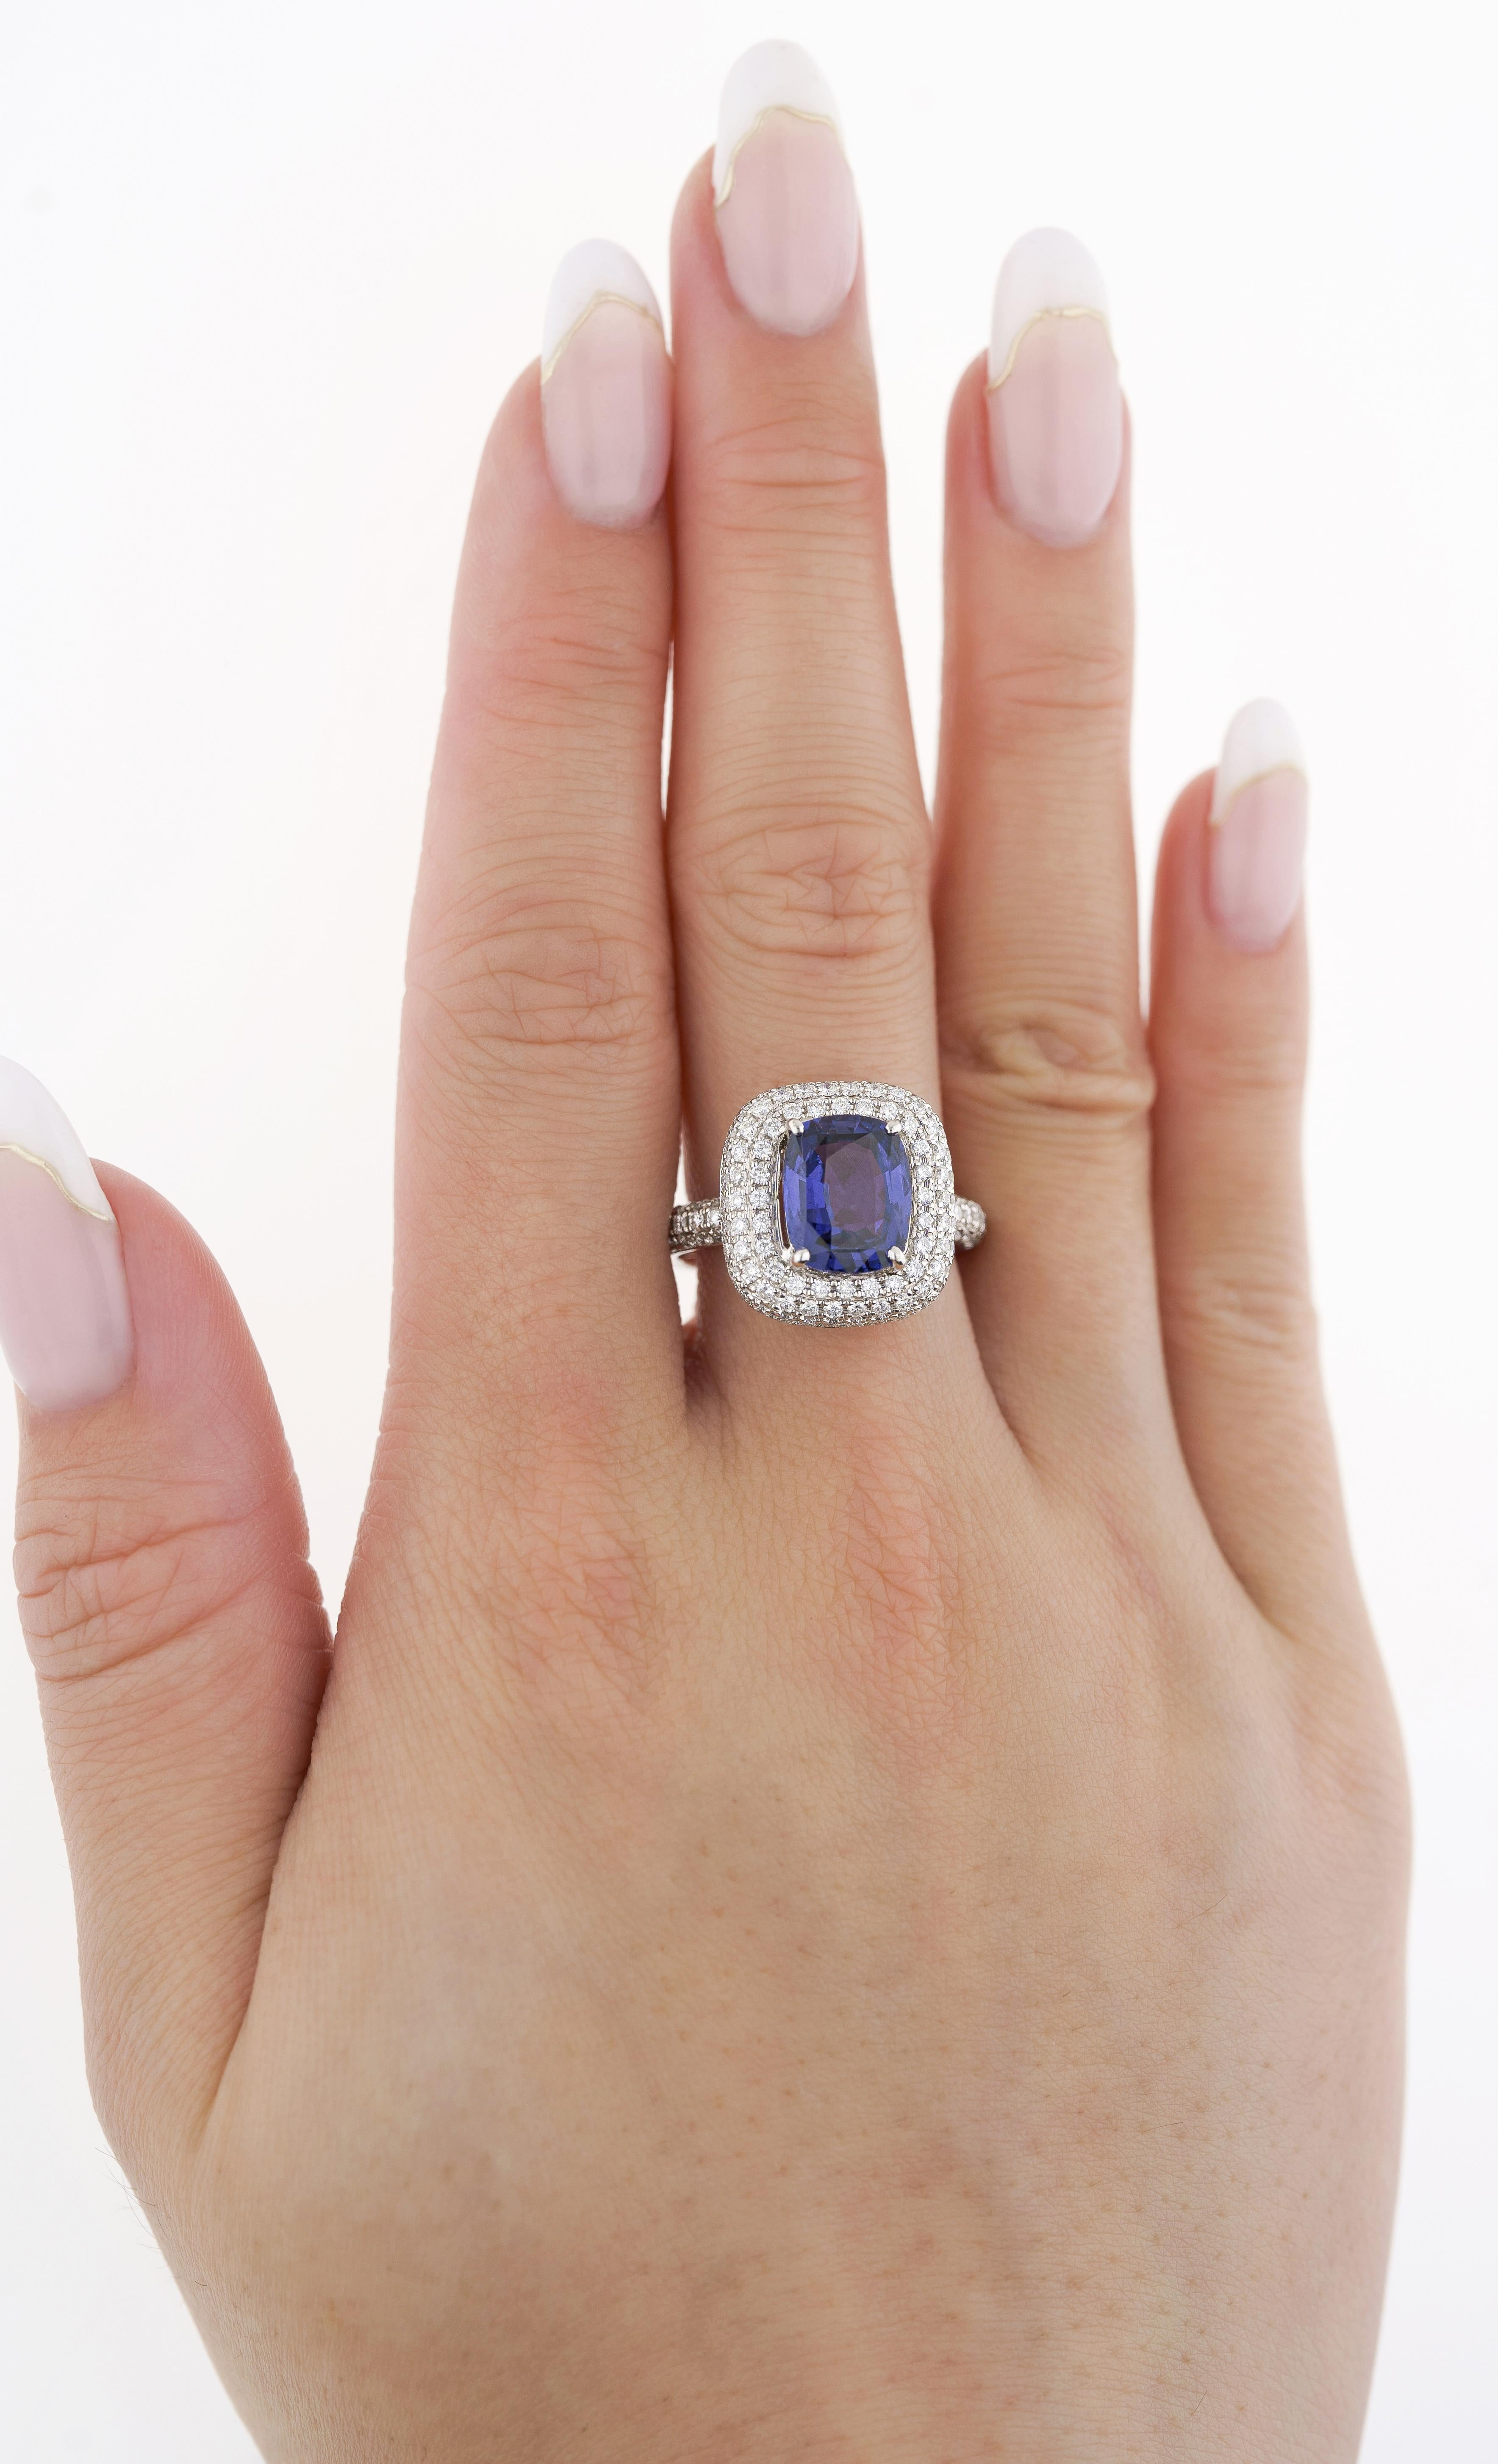 Contemporary GIA Certified No Heat Color Change 3.25 Carat Violet-Blue Sapphire Ring For Sale